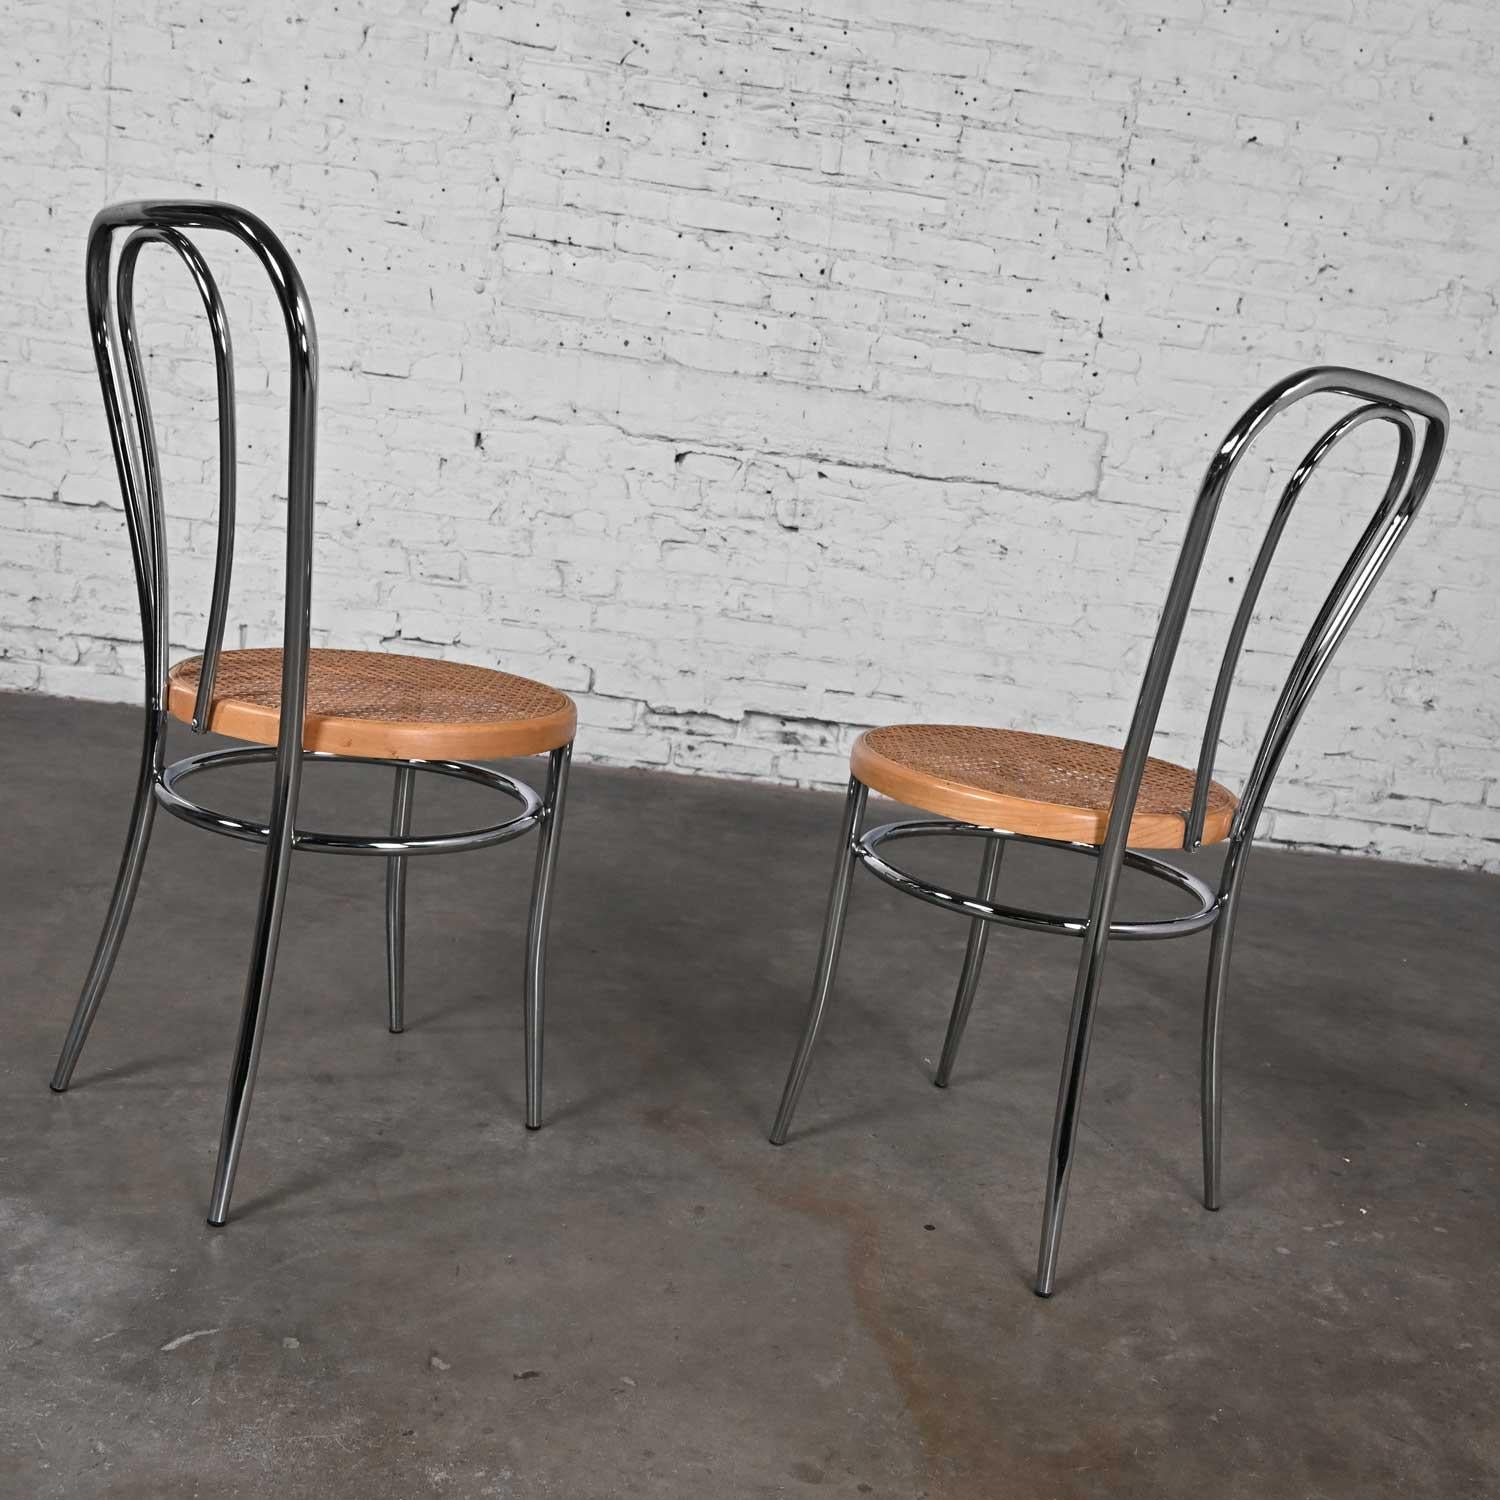 Pair Made Italy Bauhaus Style Bistro Café Chairs Chrome Cane Seat after Thonet en vente 4